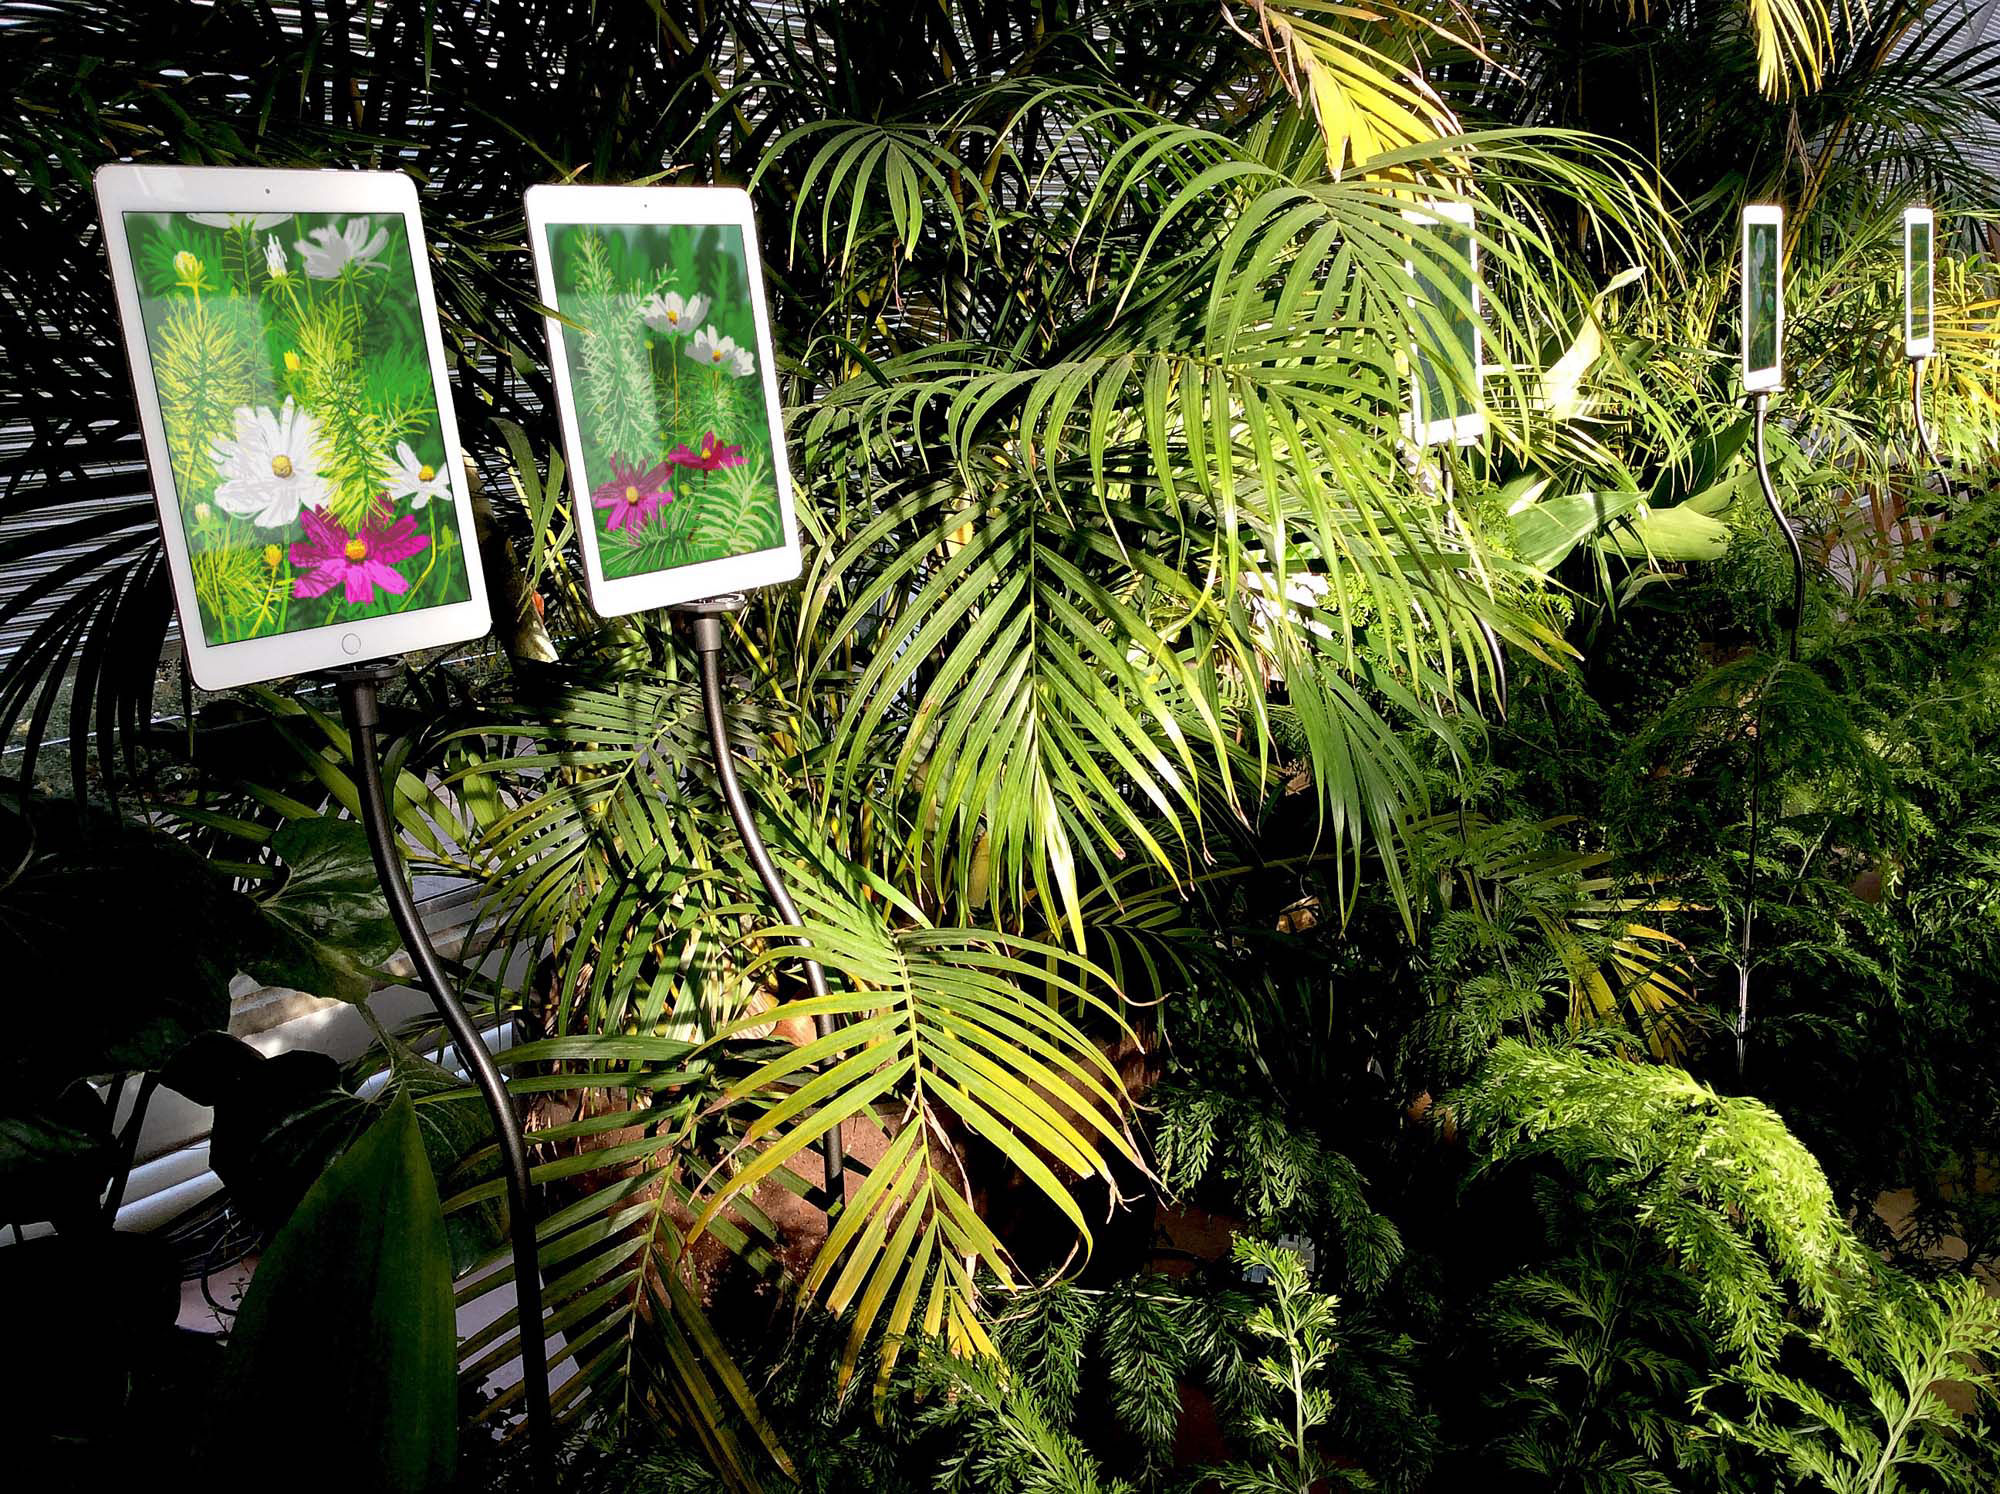 ‘The Digital Garden 2019®, animated iPad drawings at the Royal Horticultural Society Garden Wisley, UK. 1